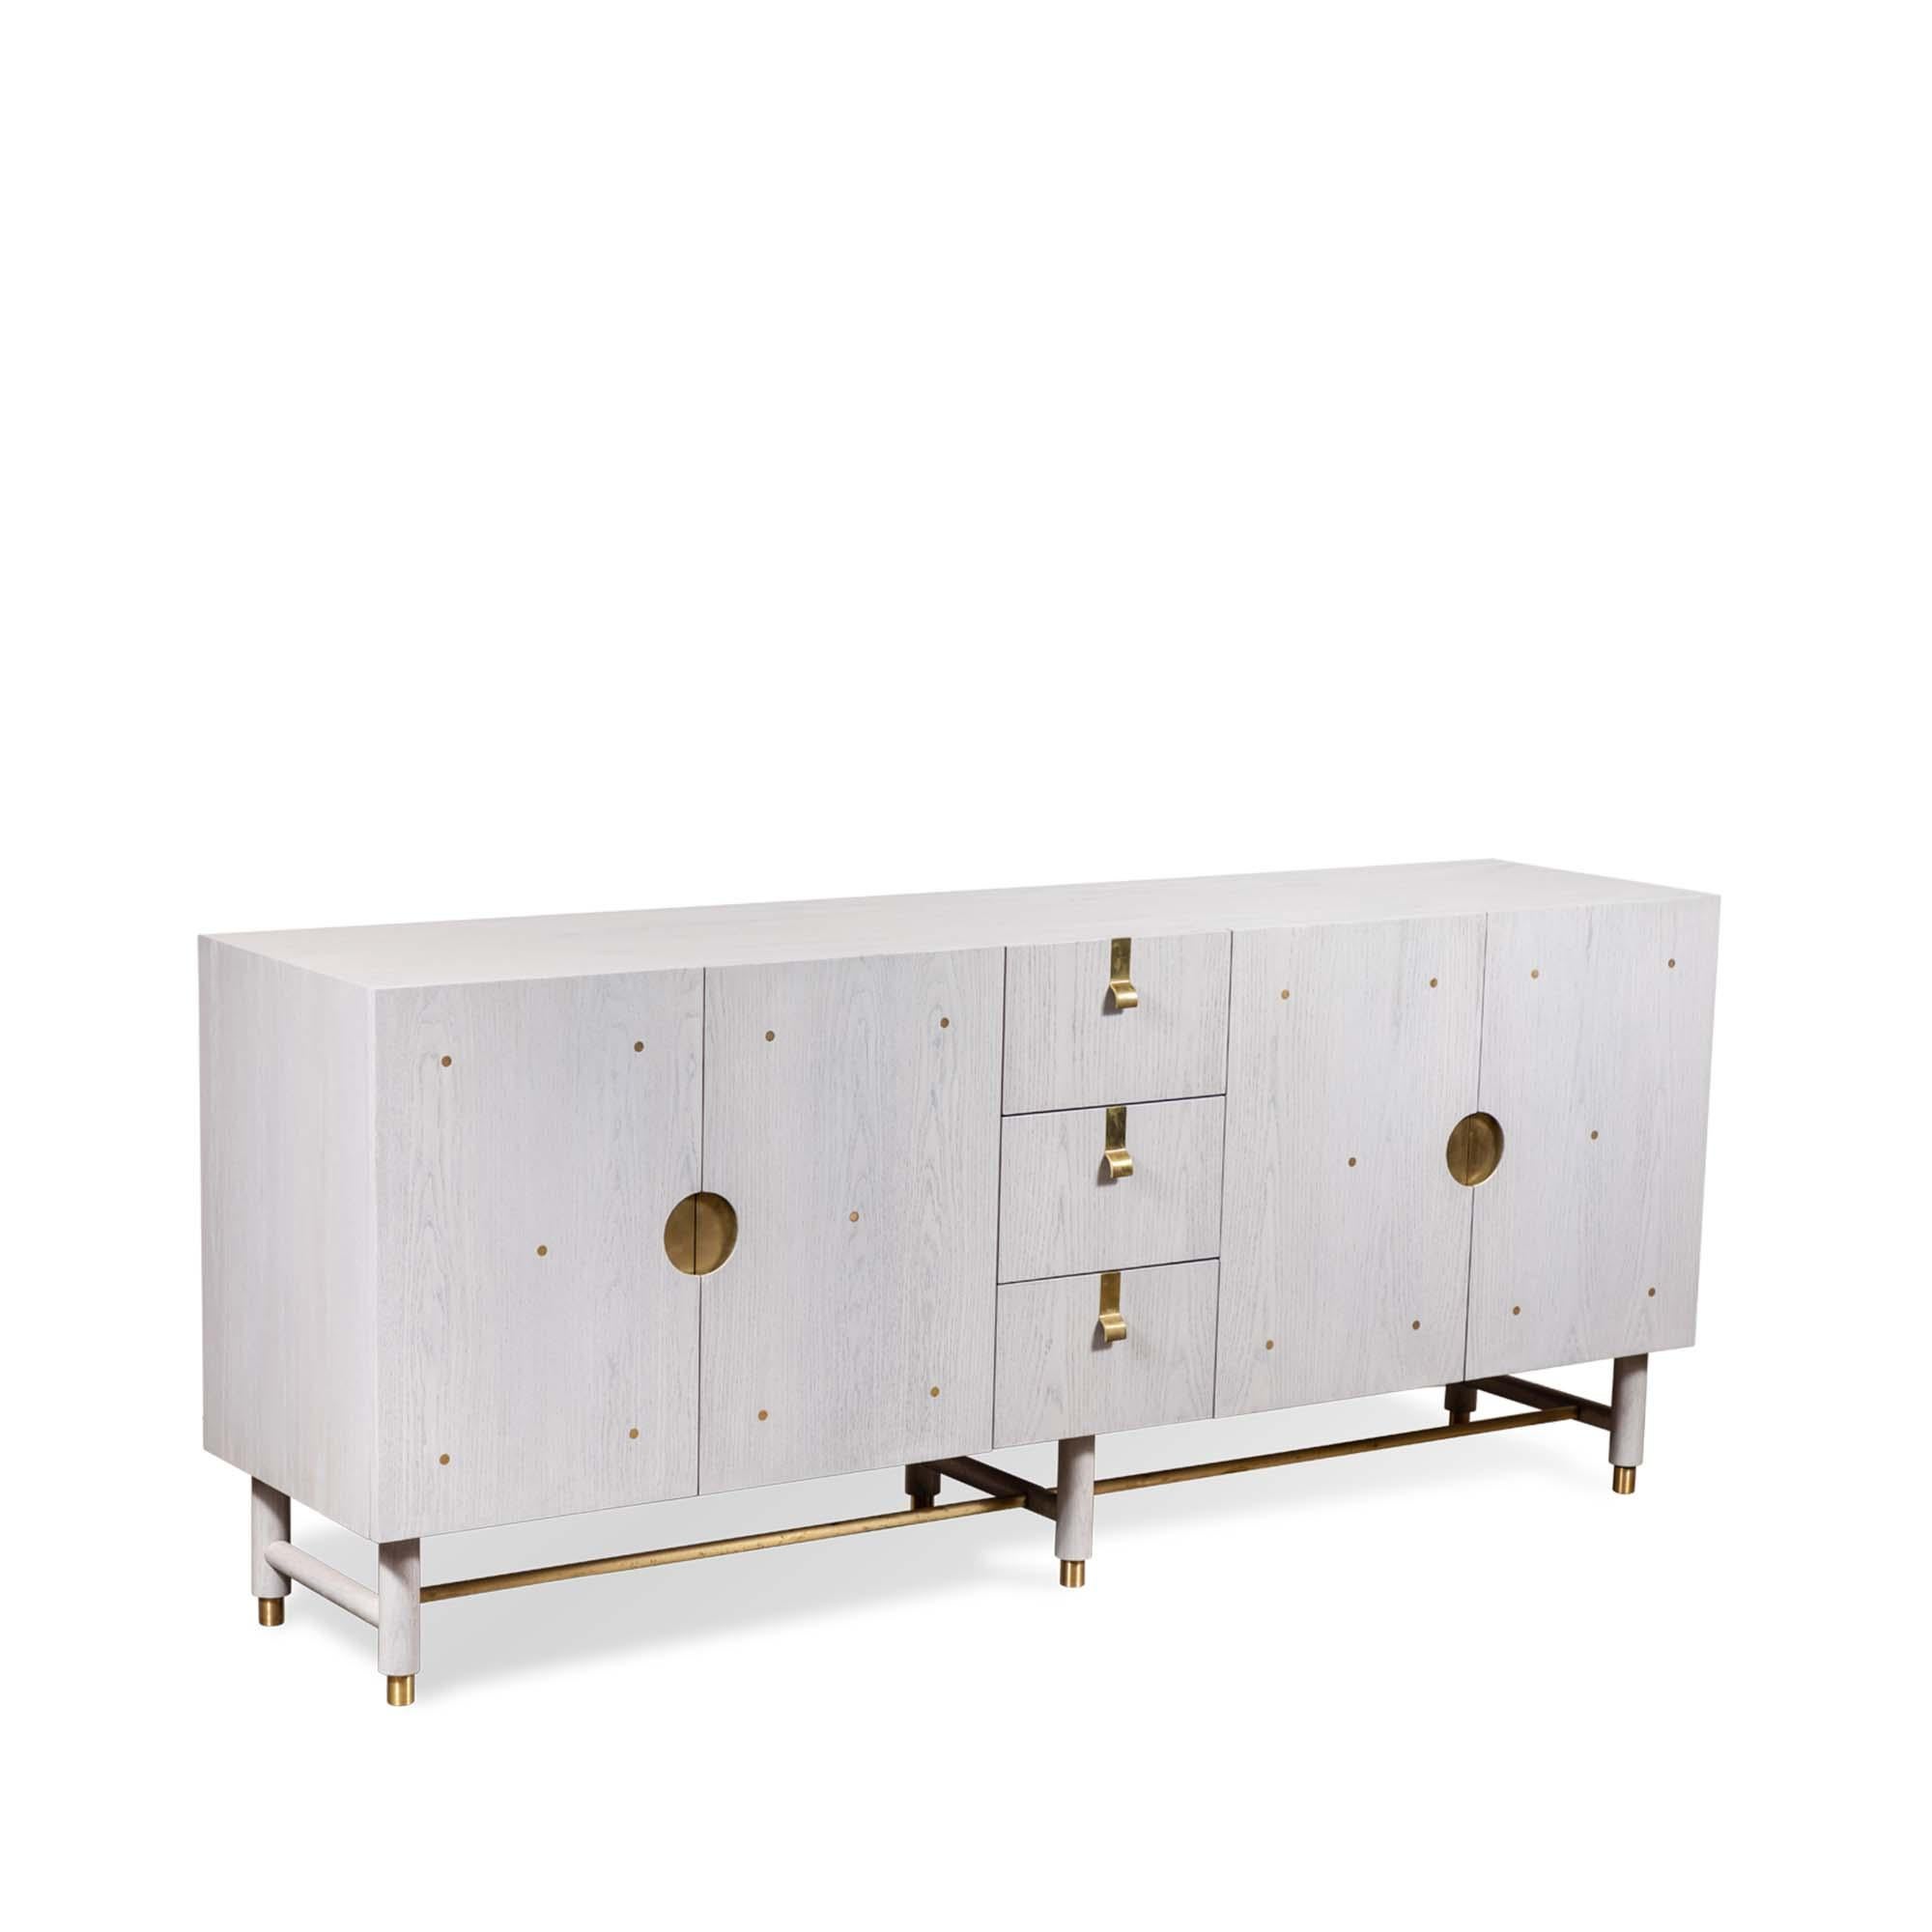 The Niguel cabinet by Lawson-Fenning has a brass stretcher on the base, brass inlaid details on the doors and insert brass handles. The interior is lacquered. 

The Lawson-Fenning Collection is designed and handmade in Los Angeles, California. Reach